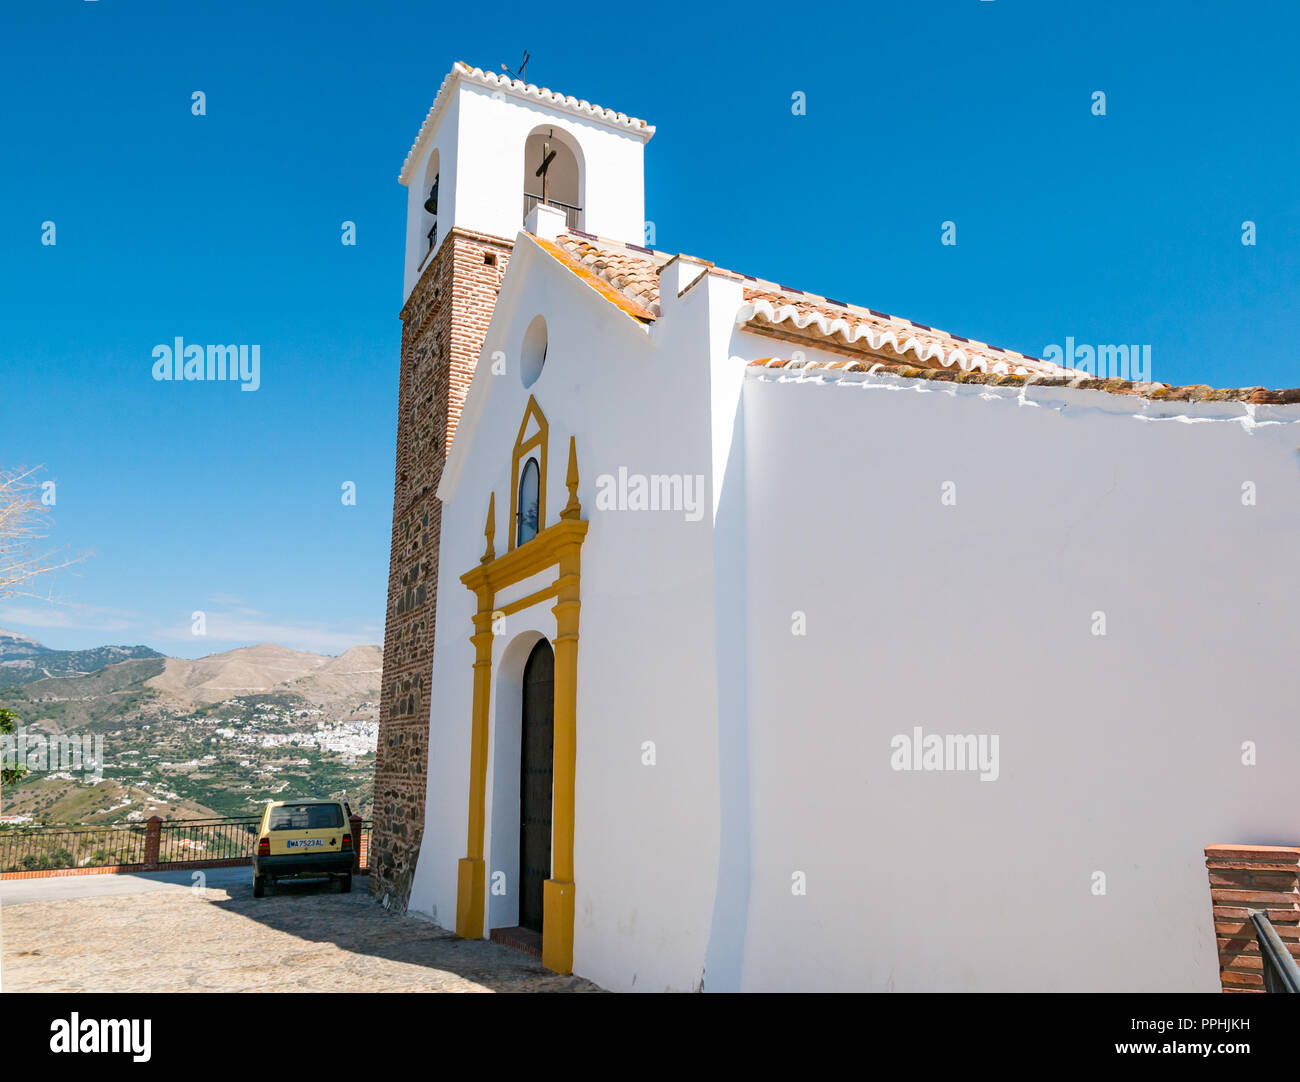 Saint Peter Catholic church with Arabic minaret converted to bell tower, Corumbela, Axarquia, Andalusia, Spain Stock Photo